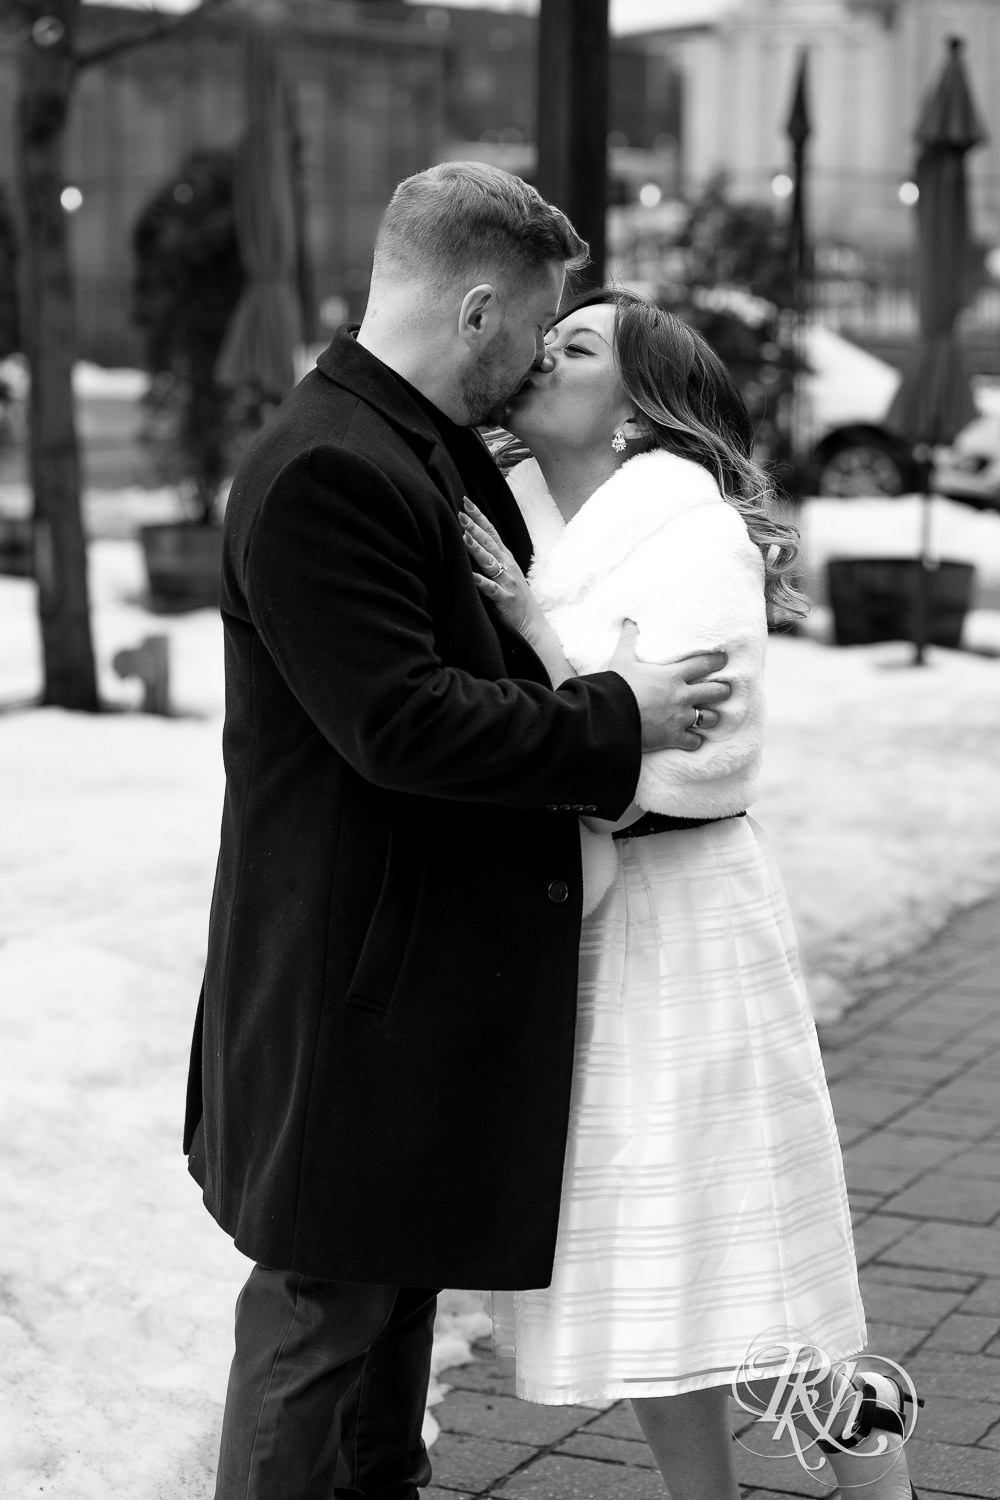 Man and Hmong woman kiss in Saint Anthony Main in Minneapolis, Minnesota.